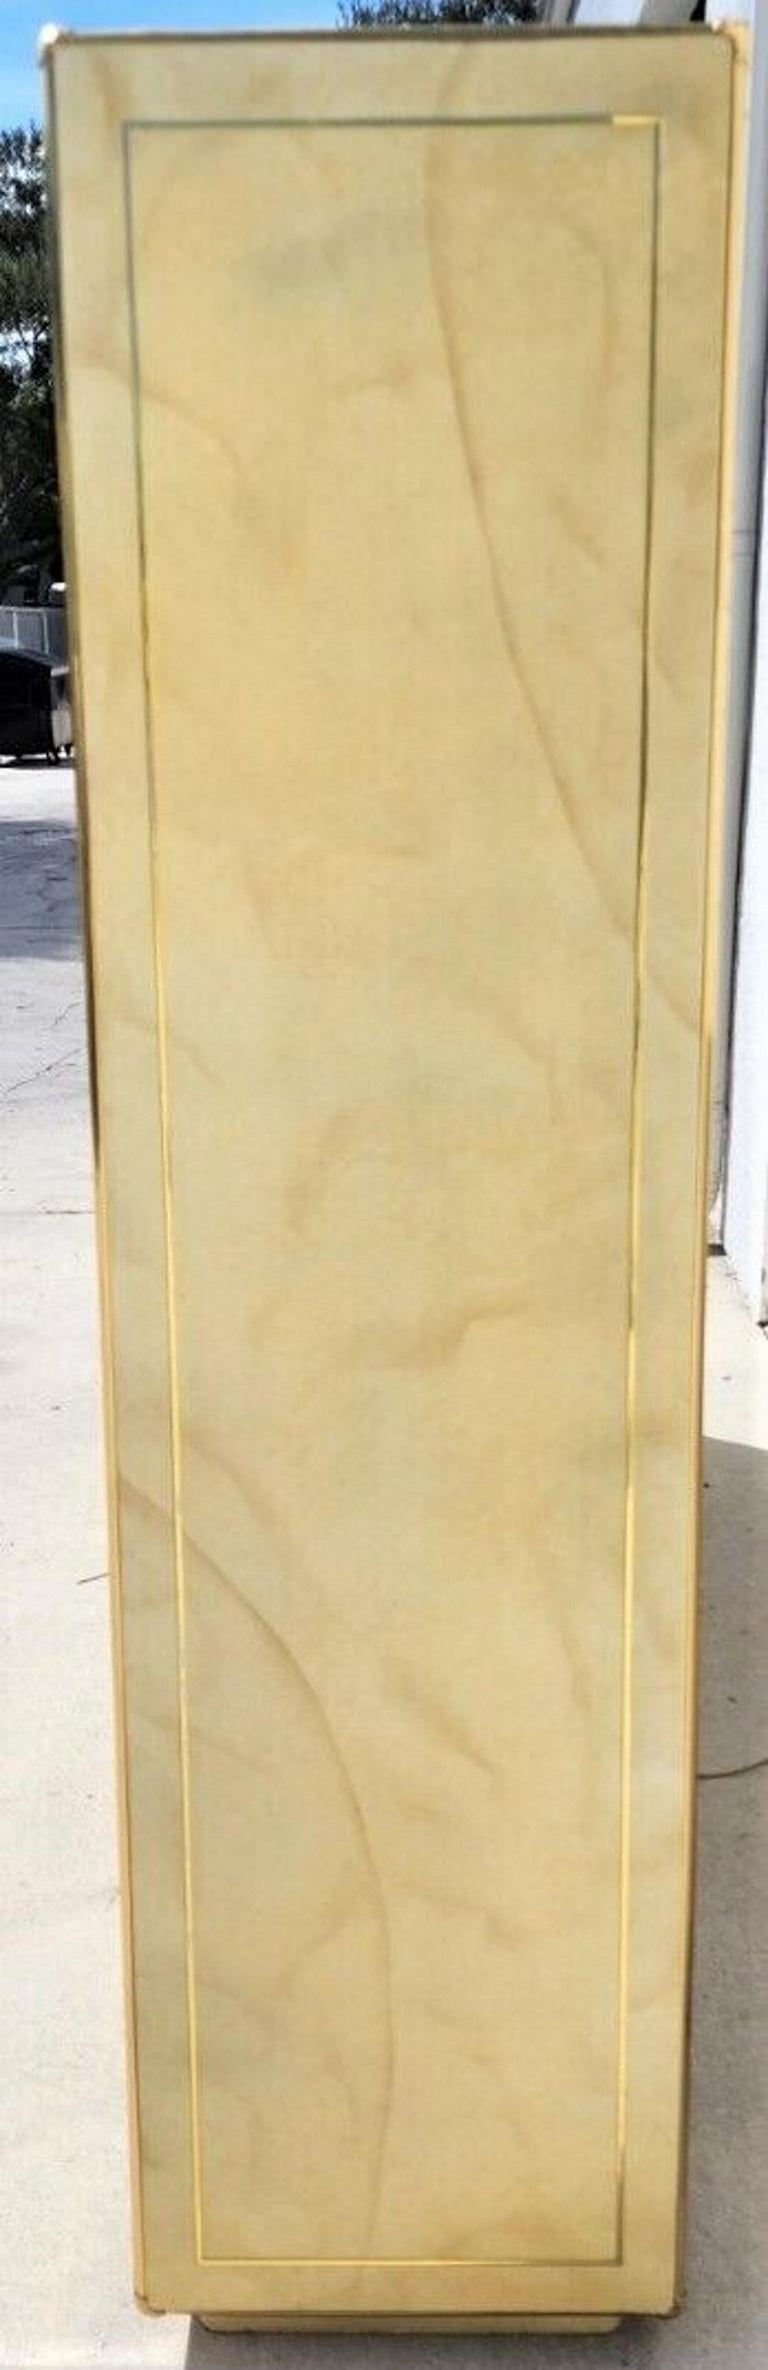 Faux Goatskin Display Etagere Bar Cabinets by JOHN STUART In Good Condition For Sale In Lake Worth, FL